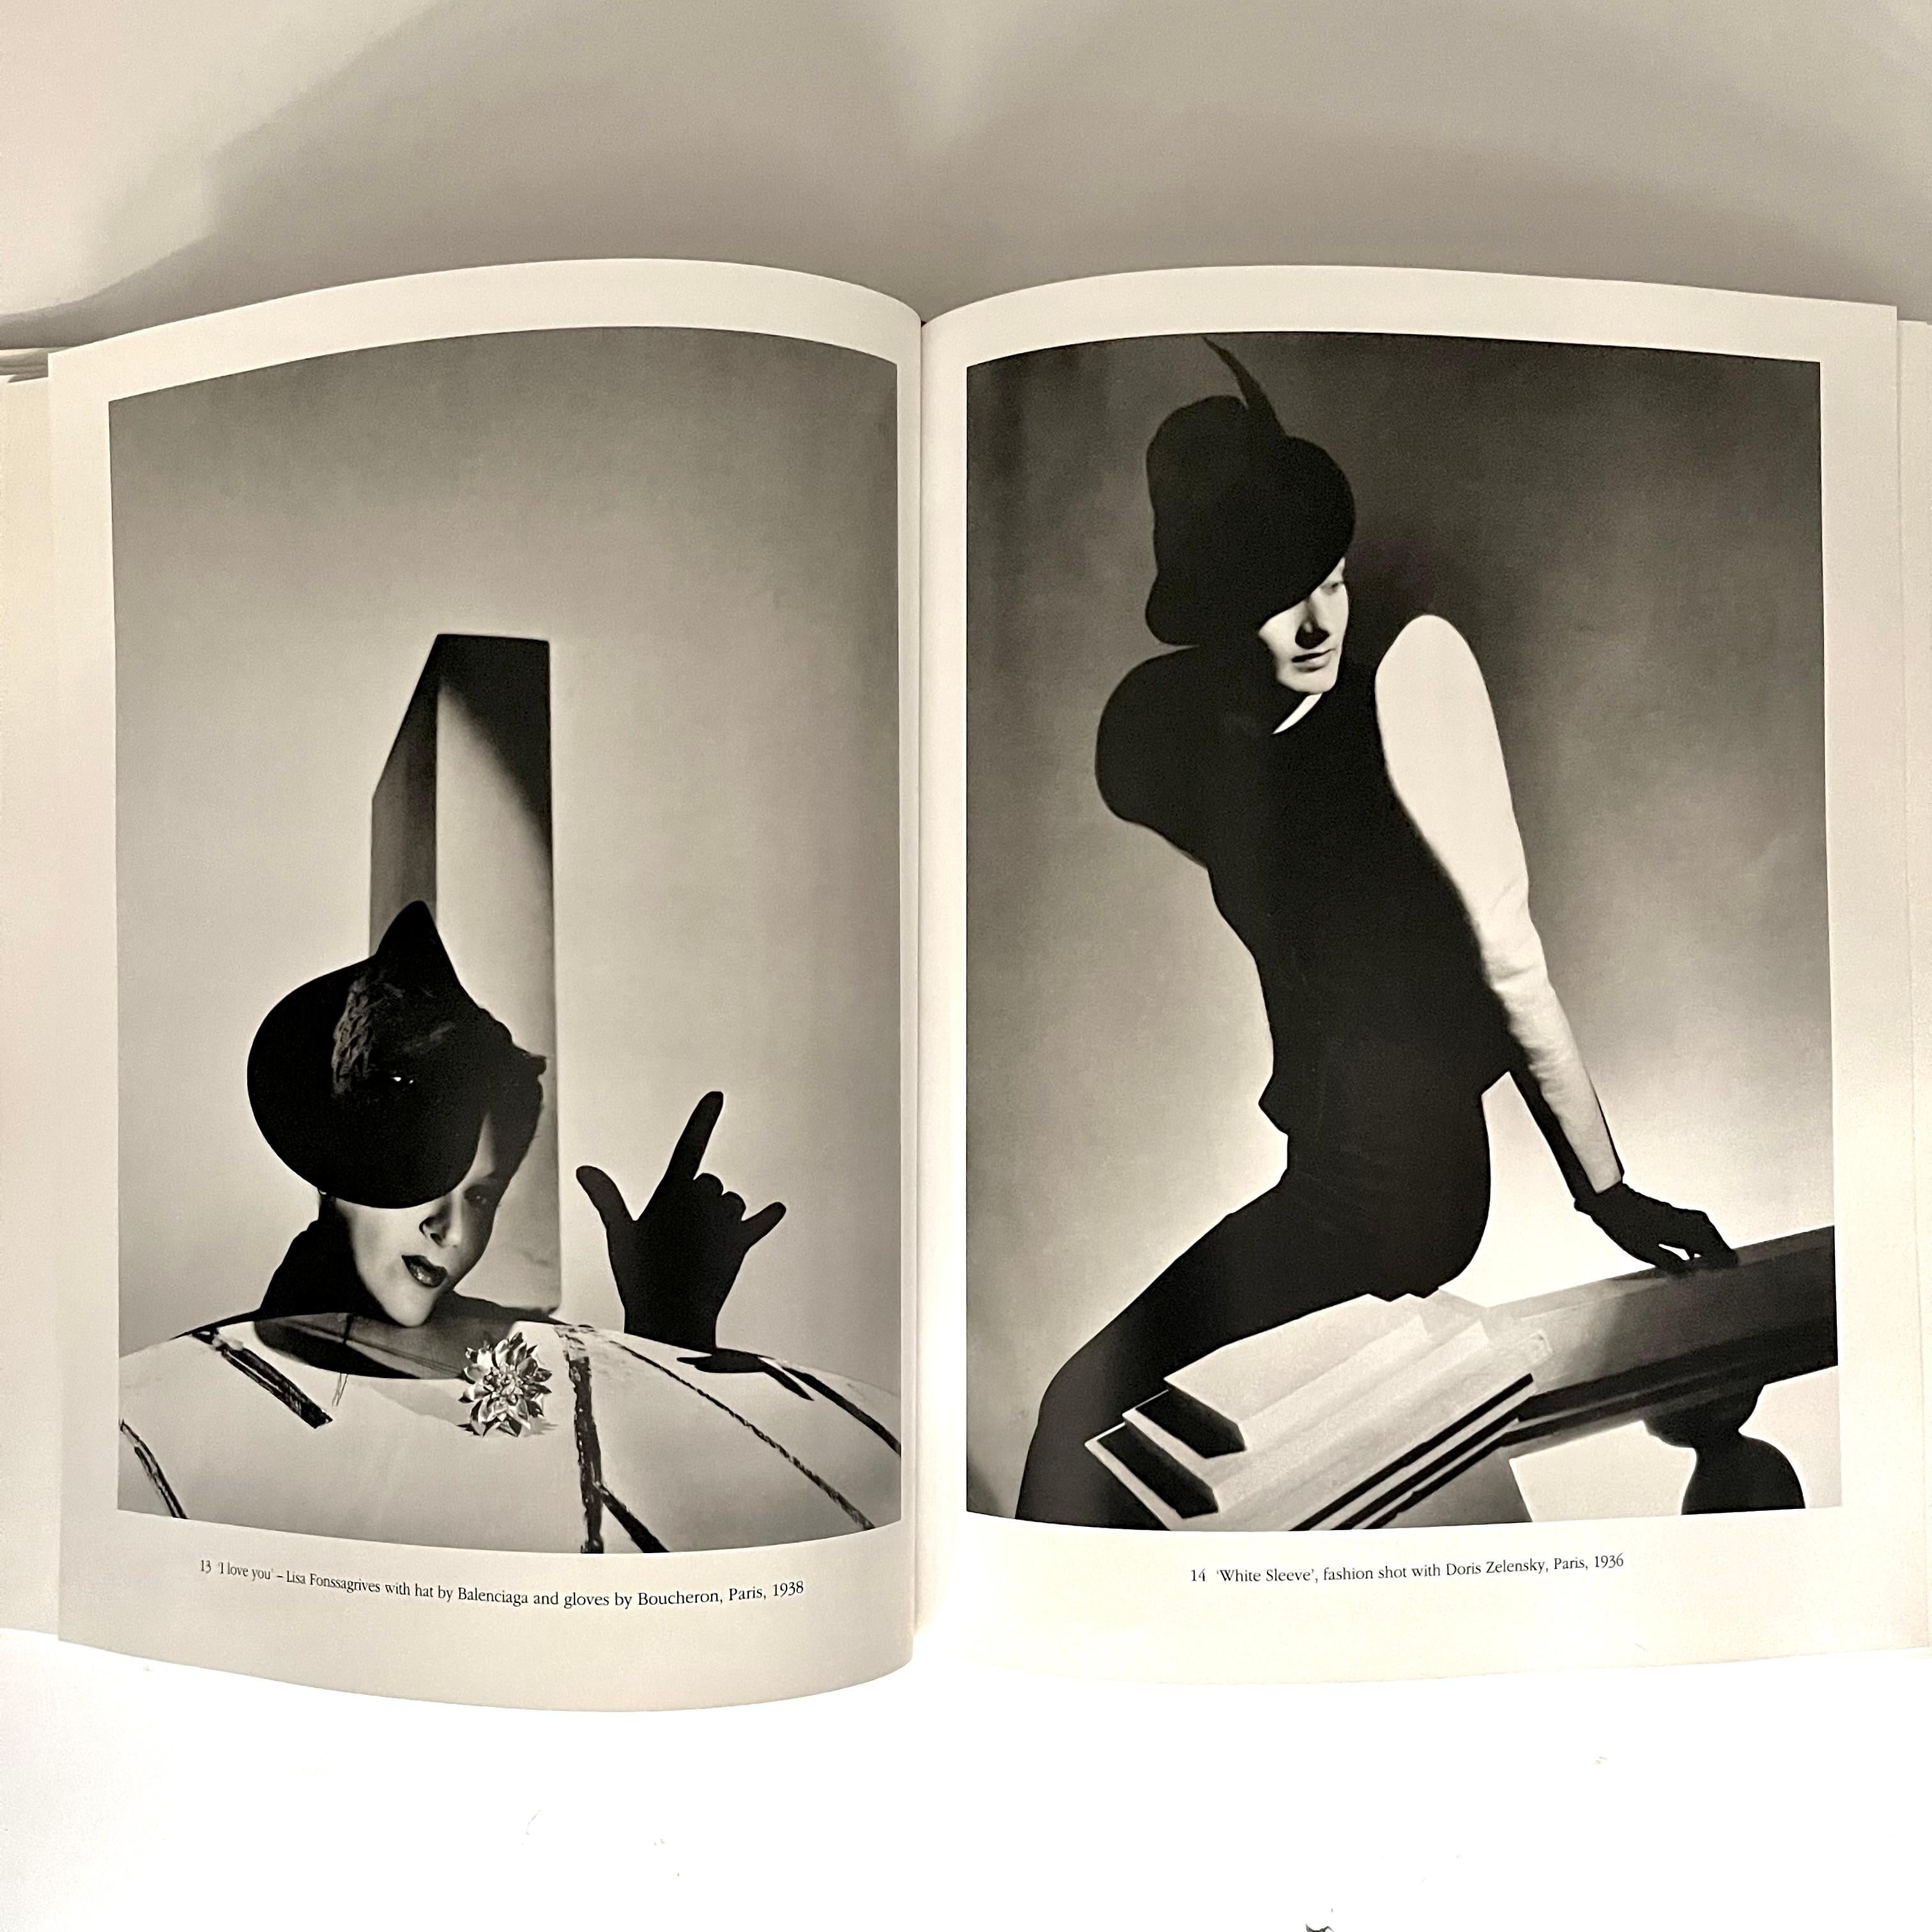 A Rizzoli publication, 1st edition, New York, 1991. Hardback, English text.

This lavishly illustrated book charts Horst’s dazzling career as a fashion photographer, which spans over six decades in its impressive longevity. This finely produced